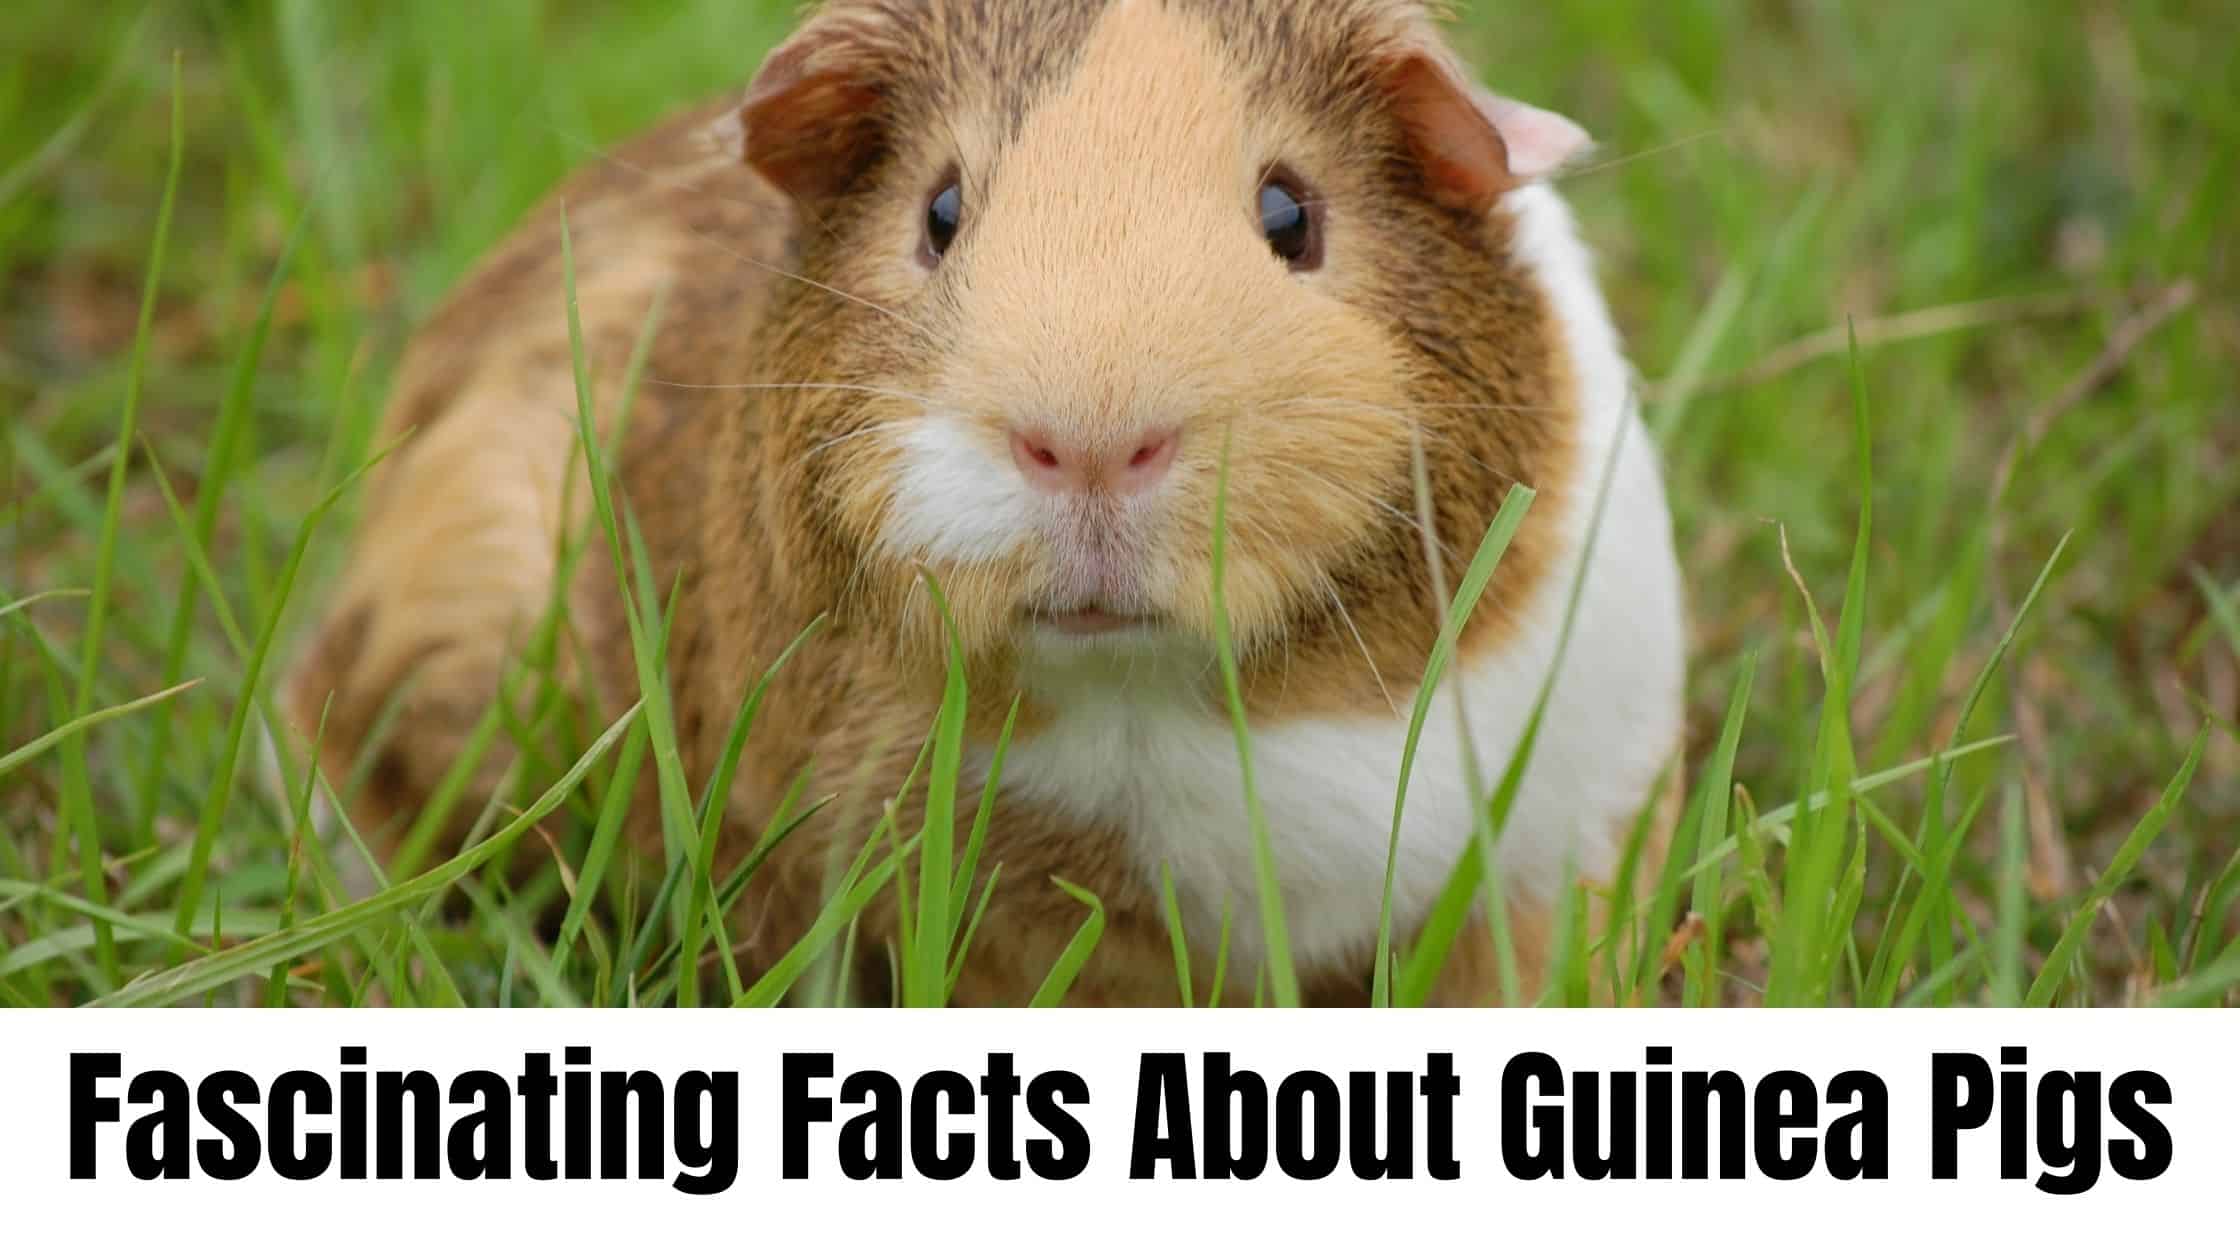 10 Fascinating Facts About Guinea Pigs